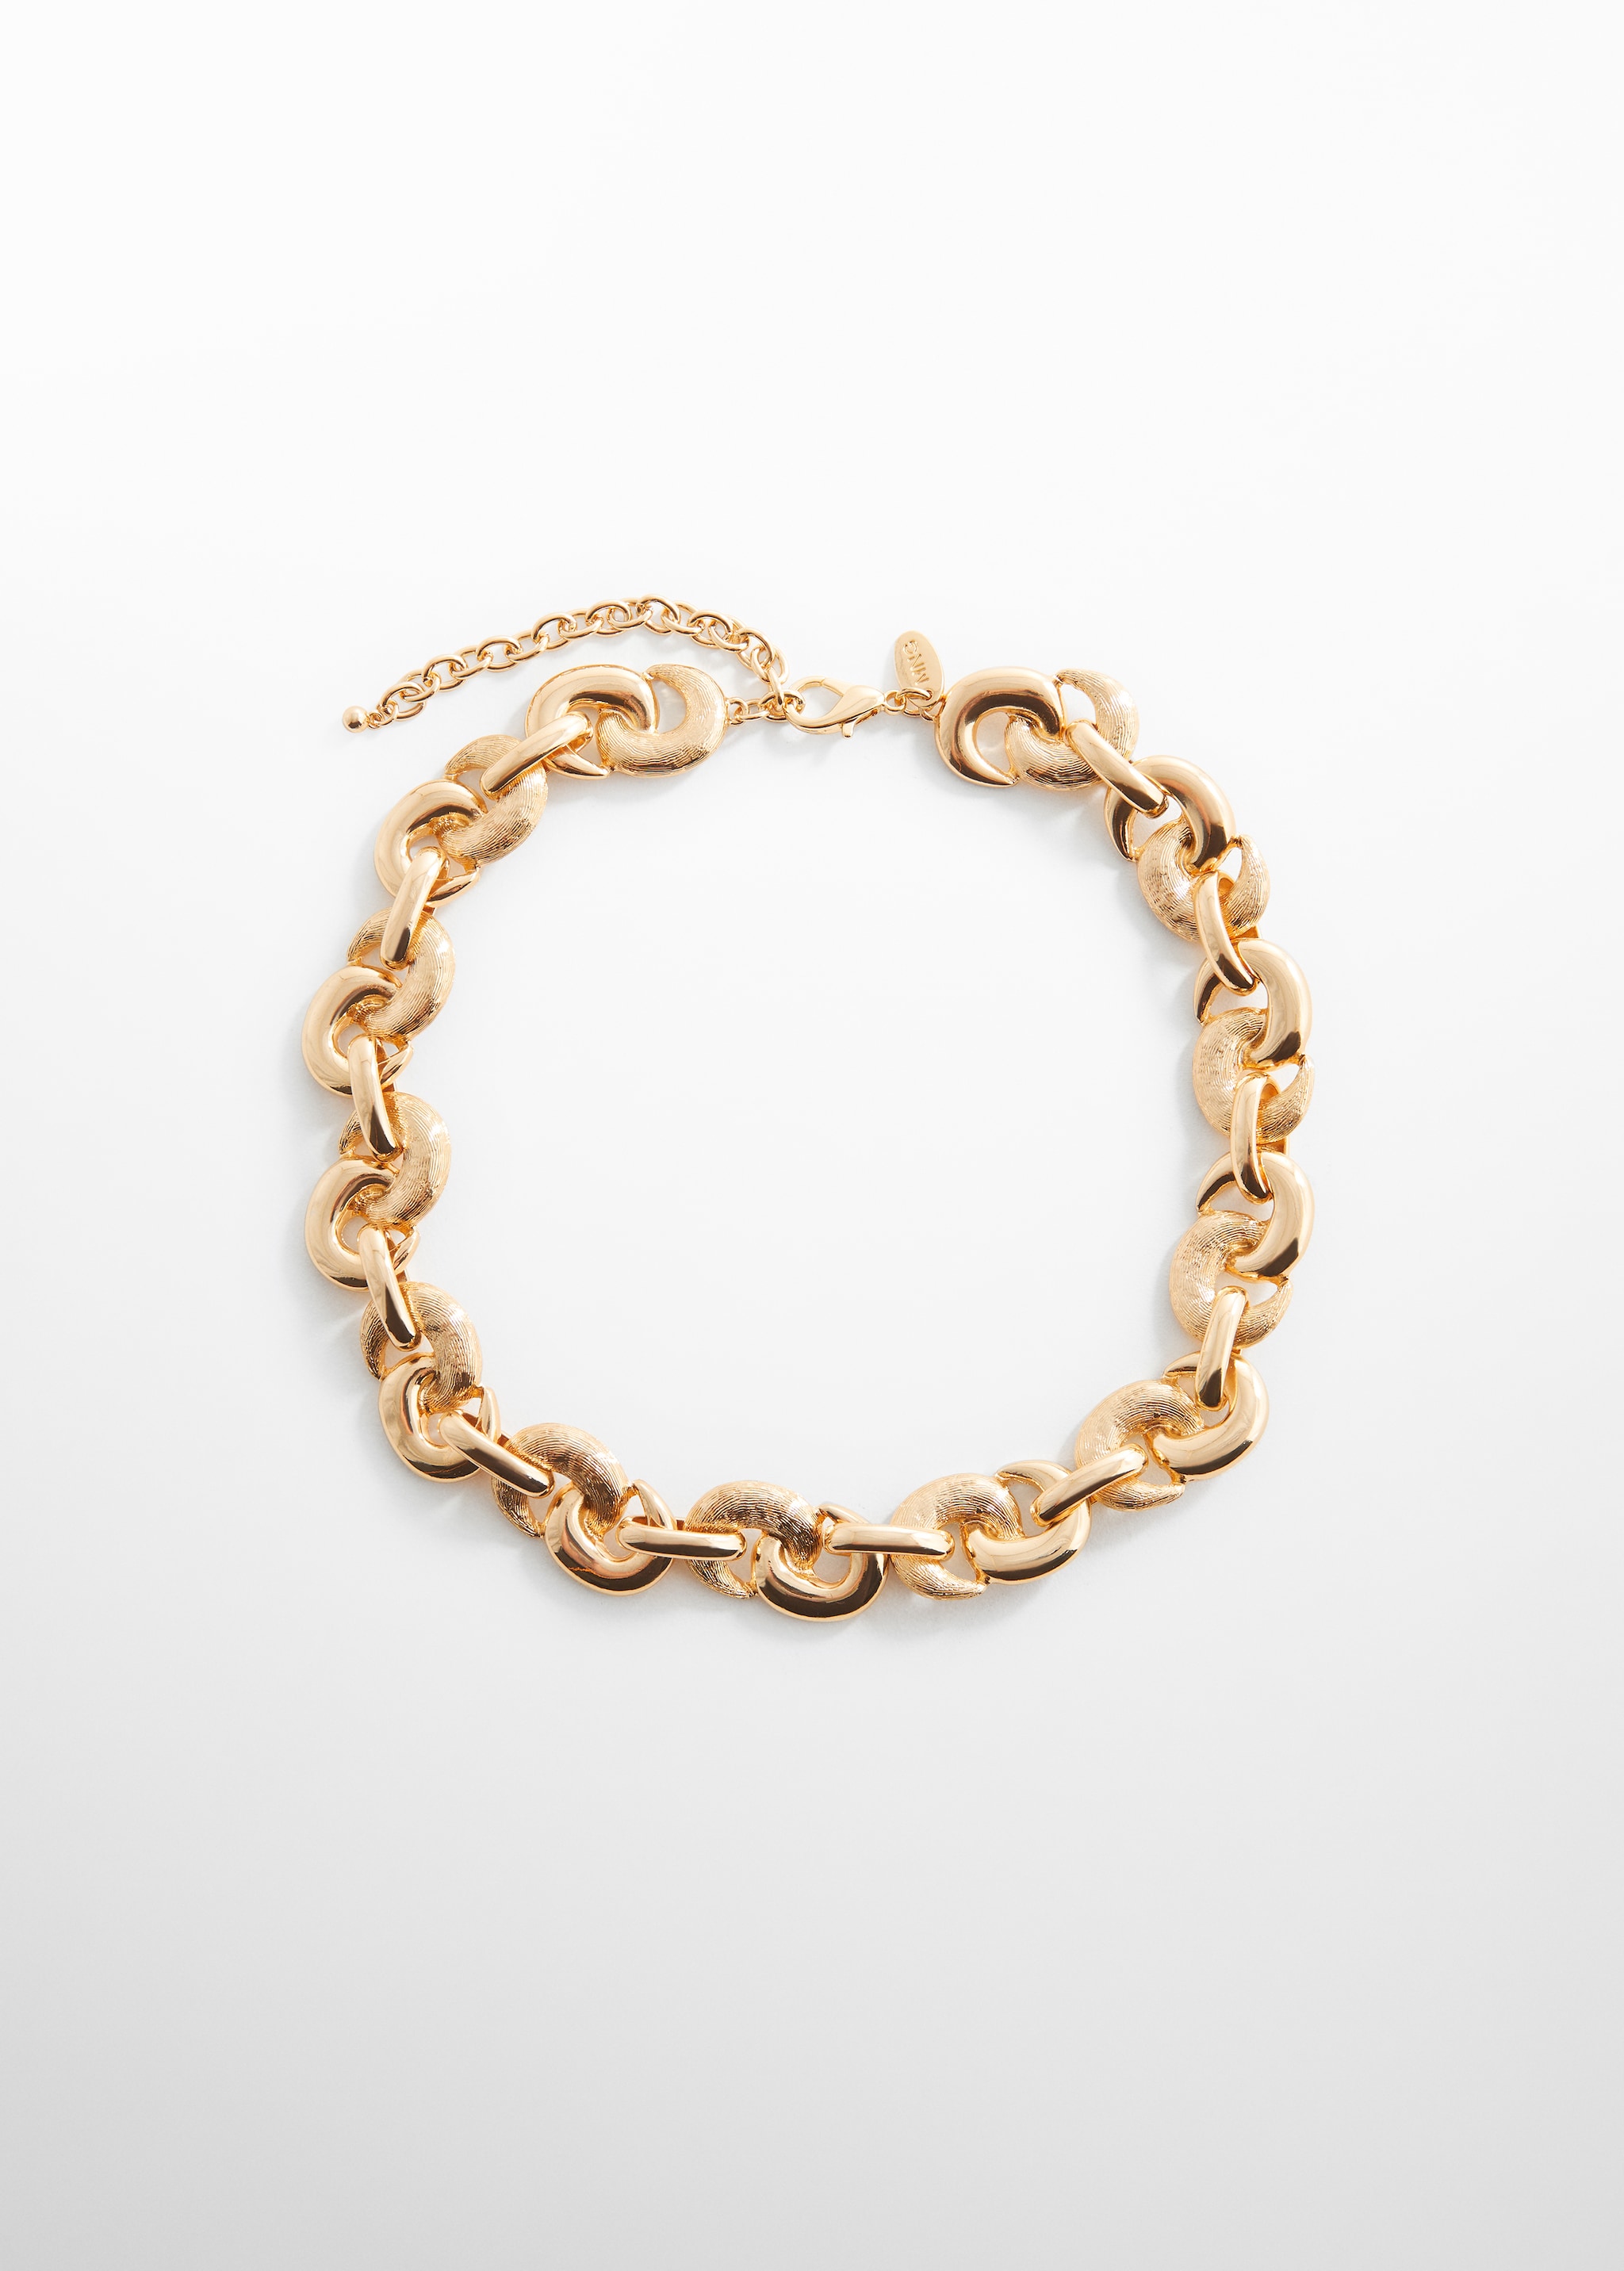 Textured chain necklace - Article without model